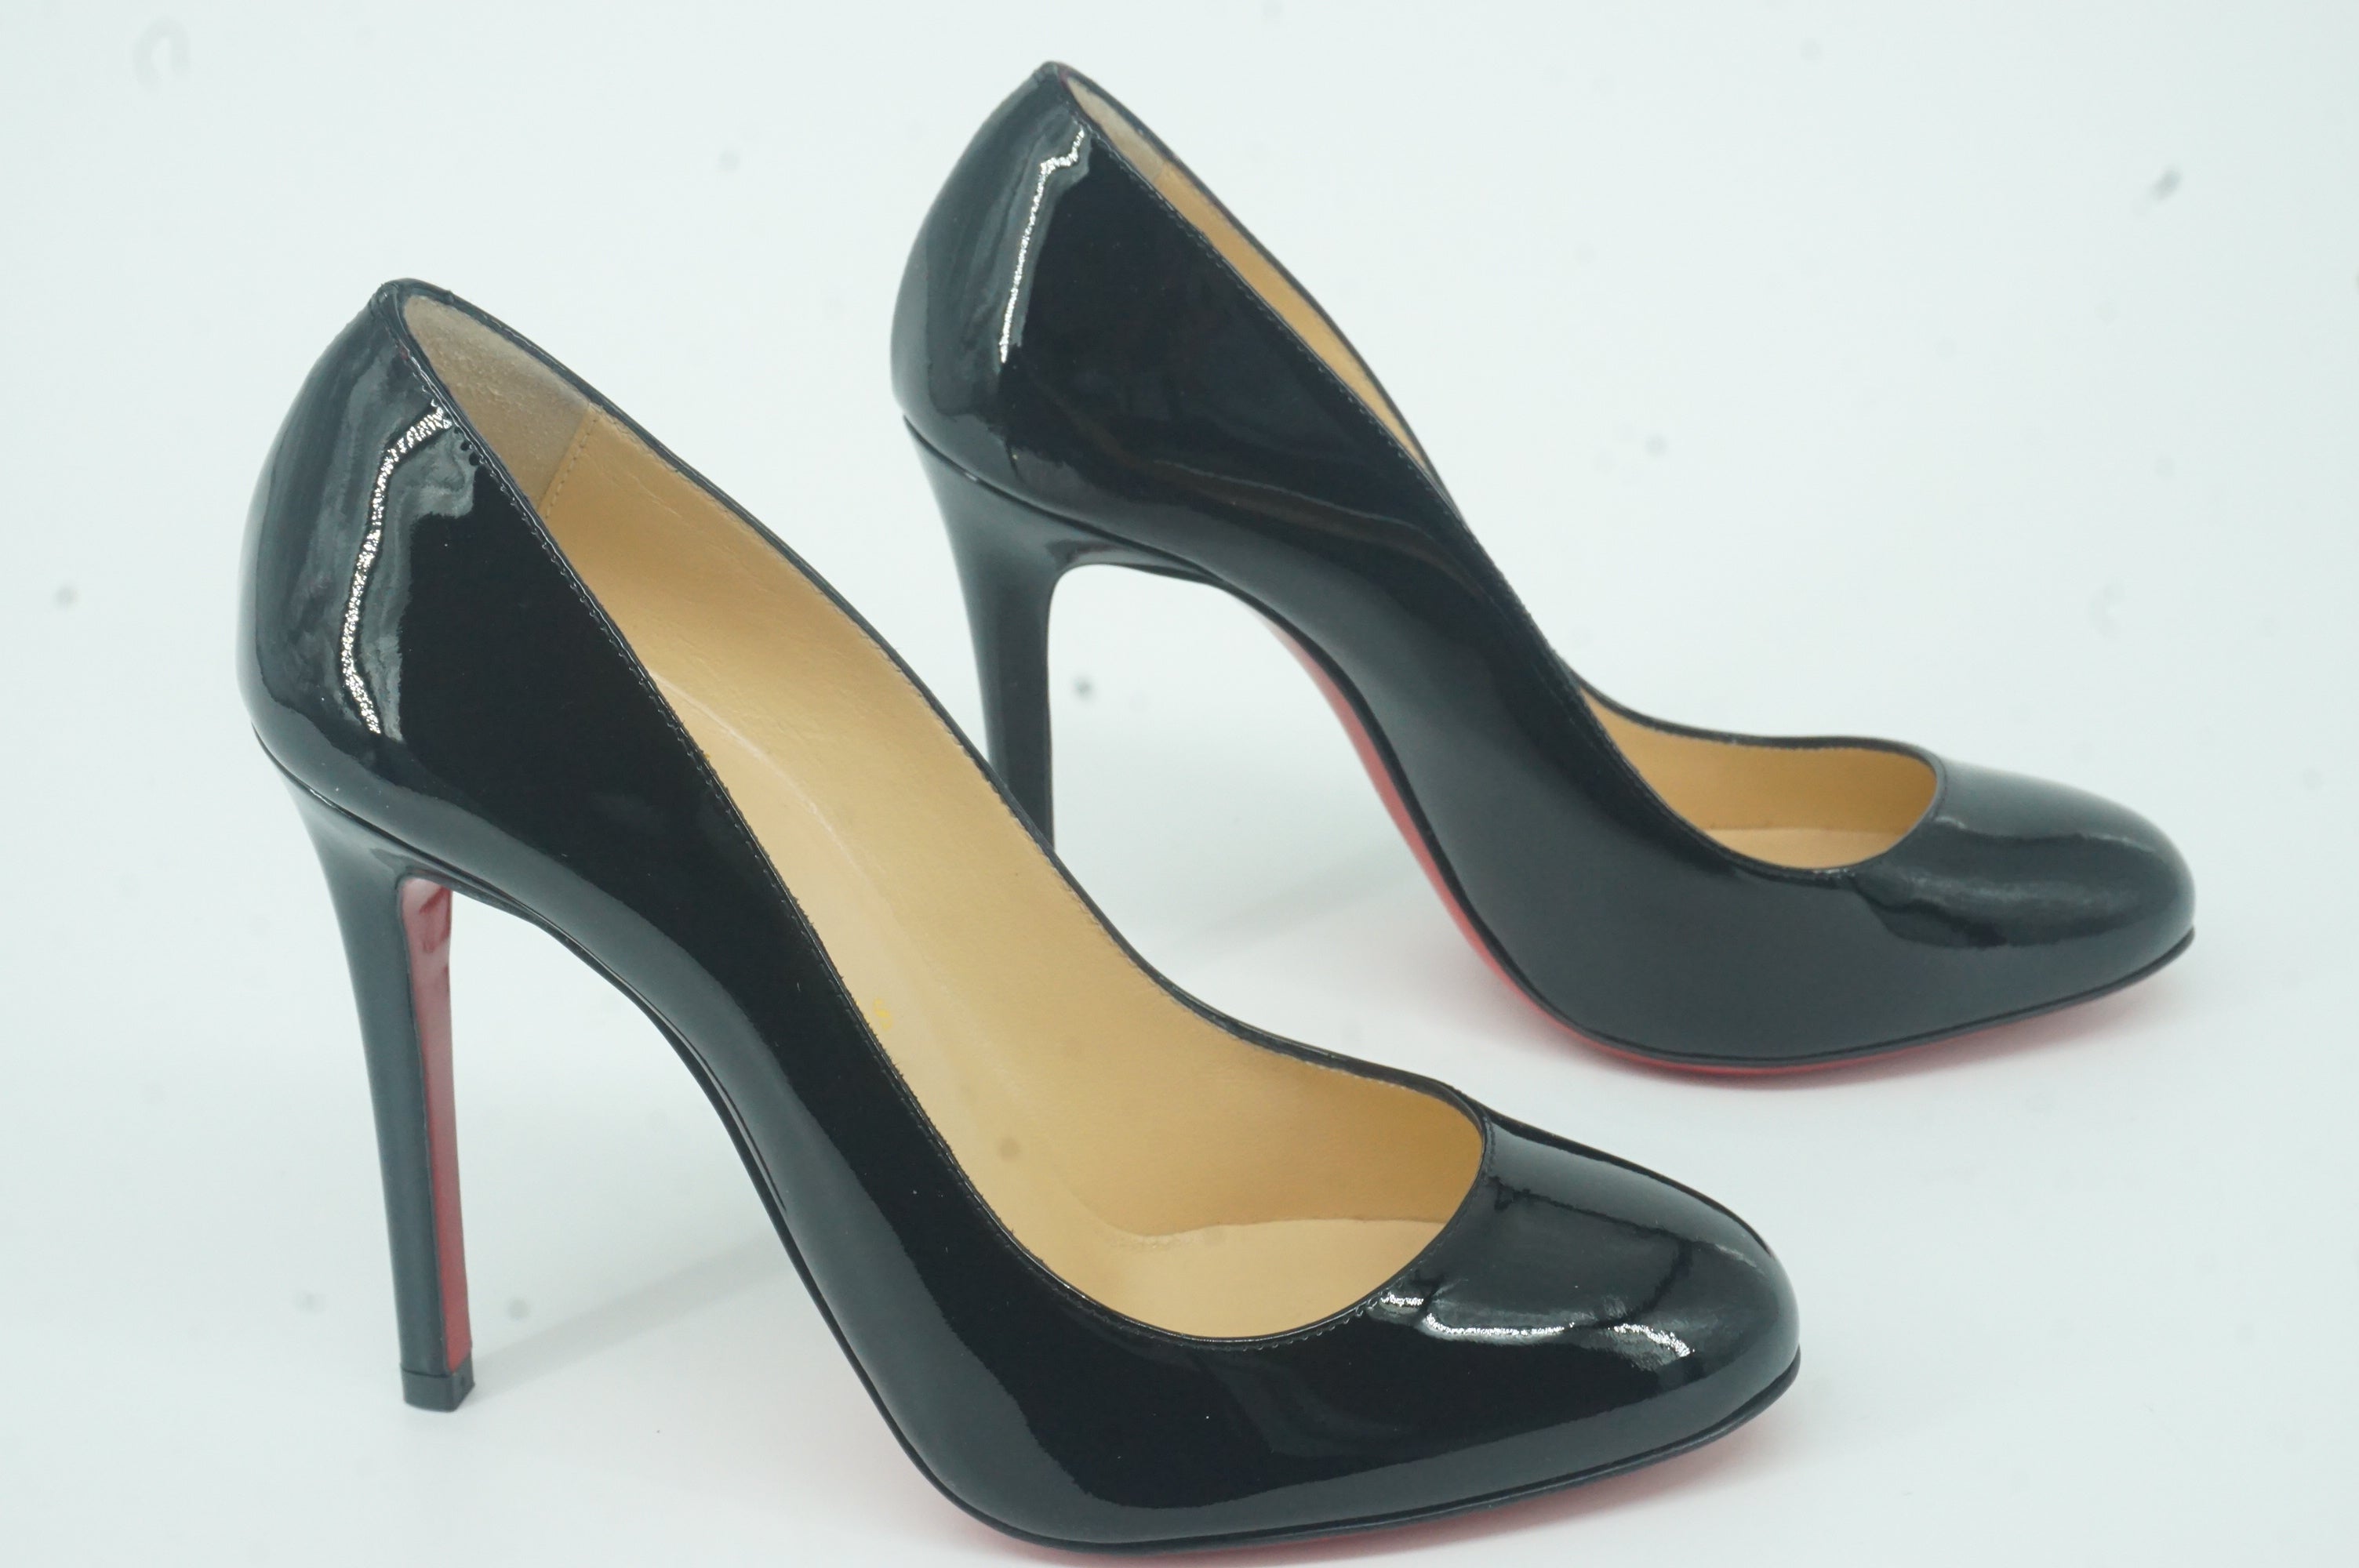 Christian Louboutin Fifille Black Patent Leather Pumps SZ 36.5 Round Toe $695